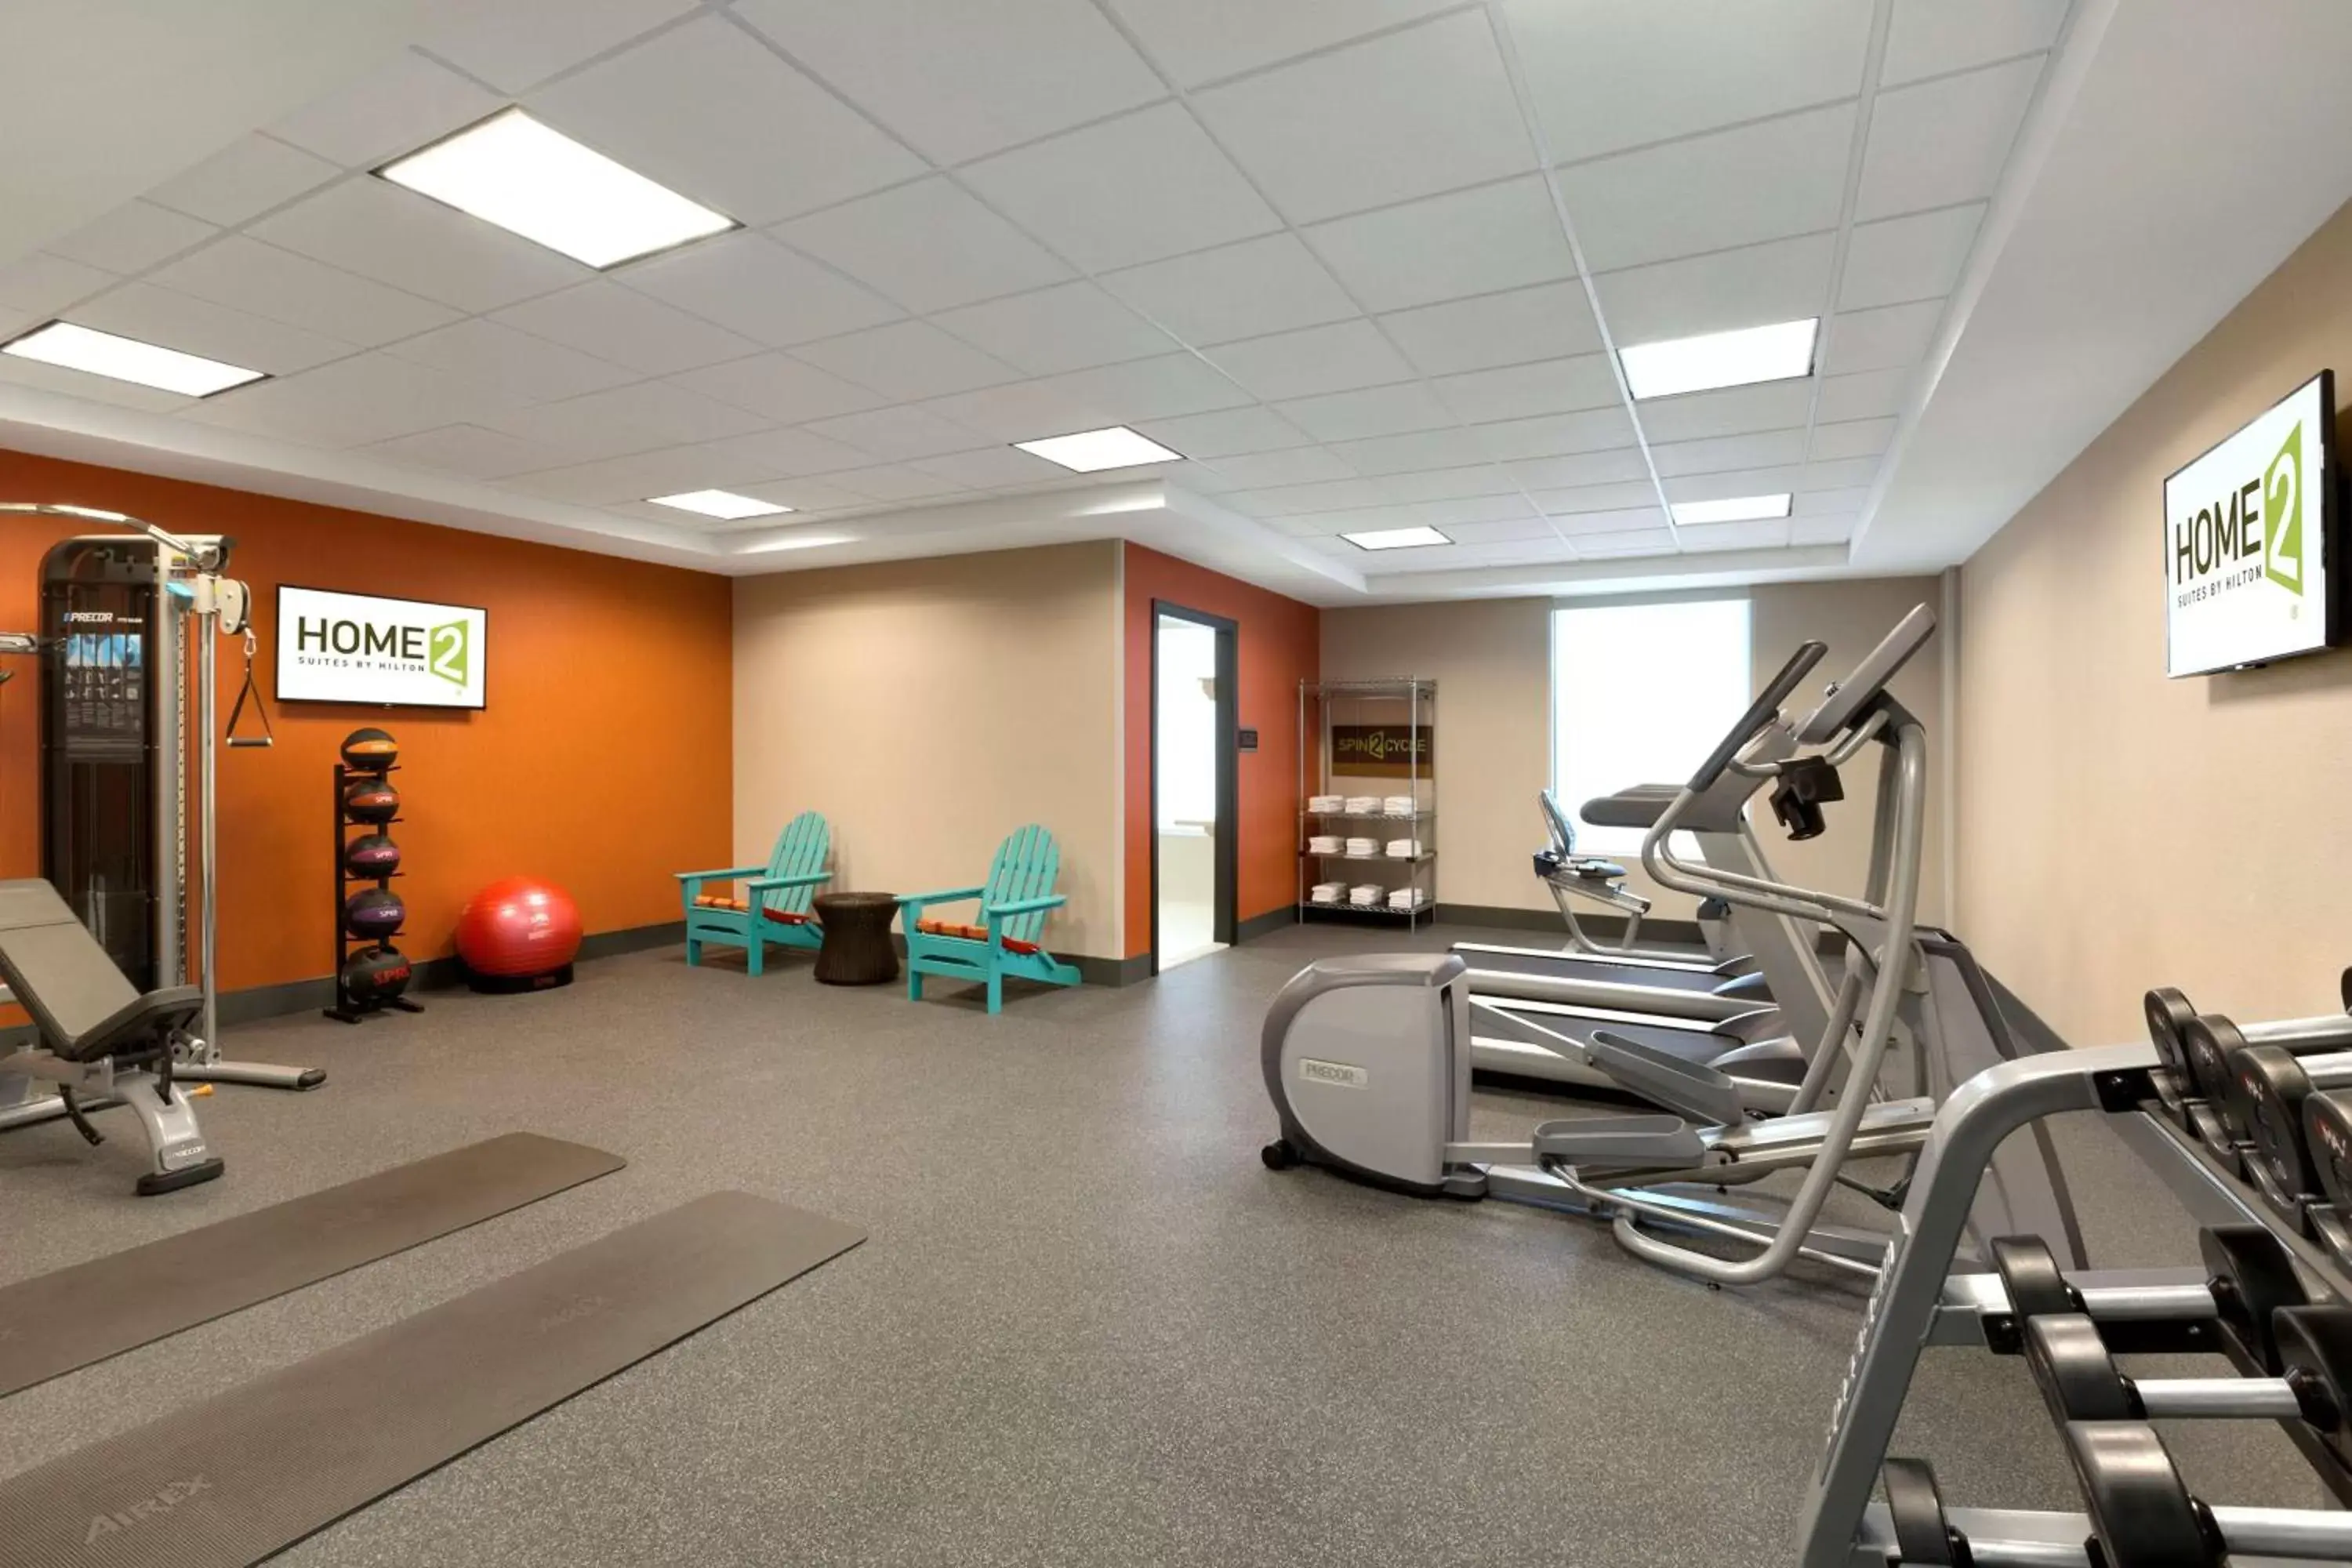 Fitness centre/facilities, Fitness Center/Facilities in Home2 Suites By Hilton Hasbrouck Heights